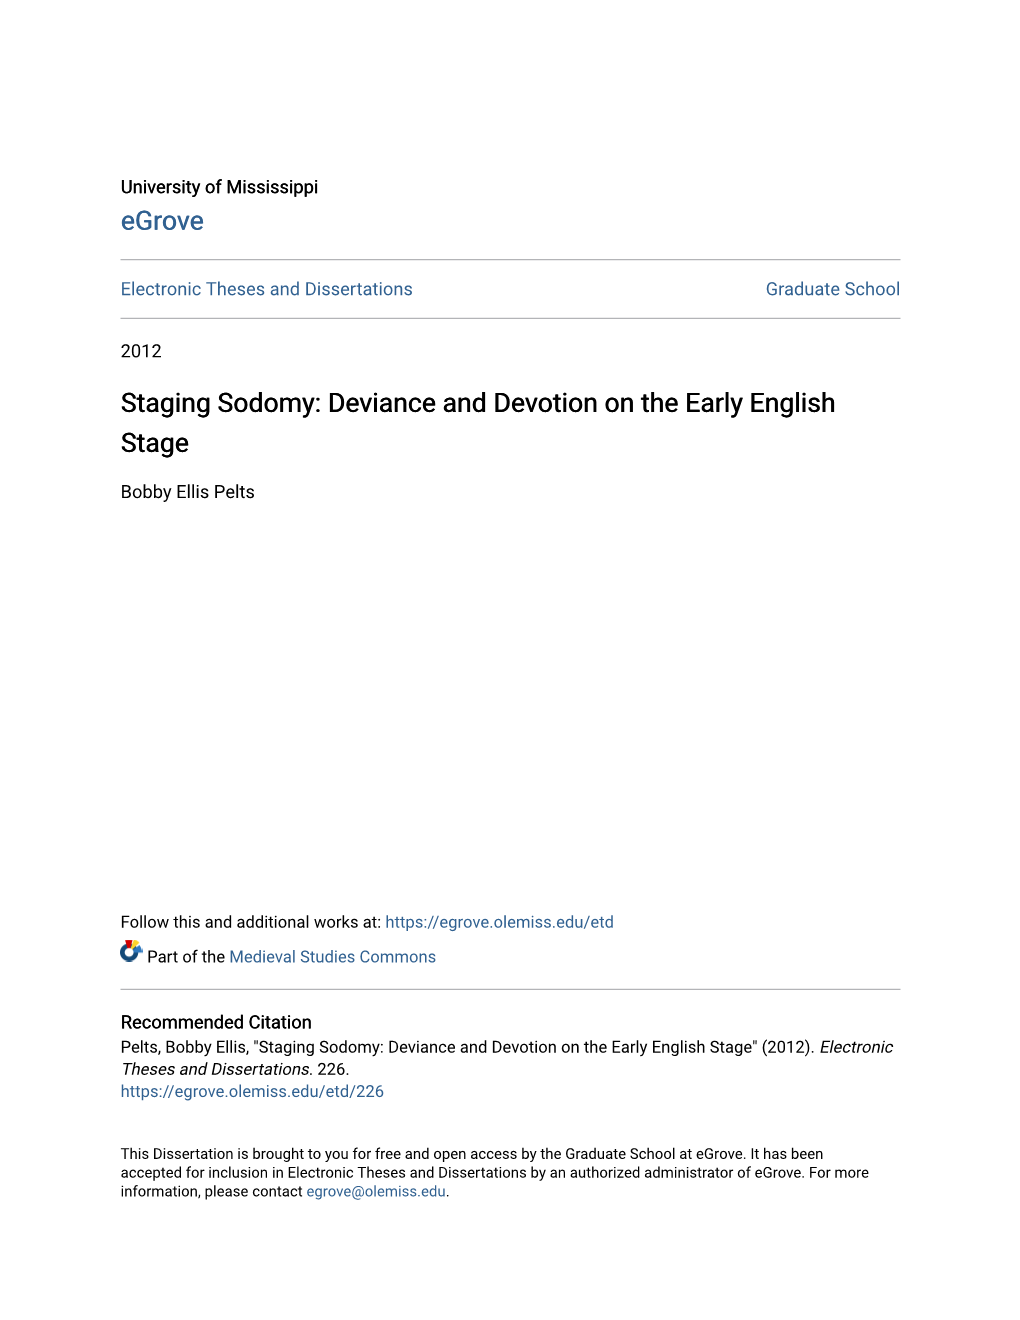 Staging Sodomy: Deviance and Devotion on the Early English Stage